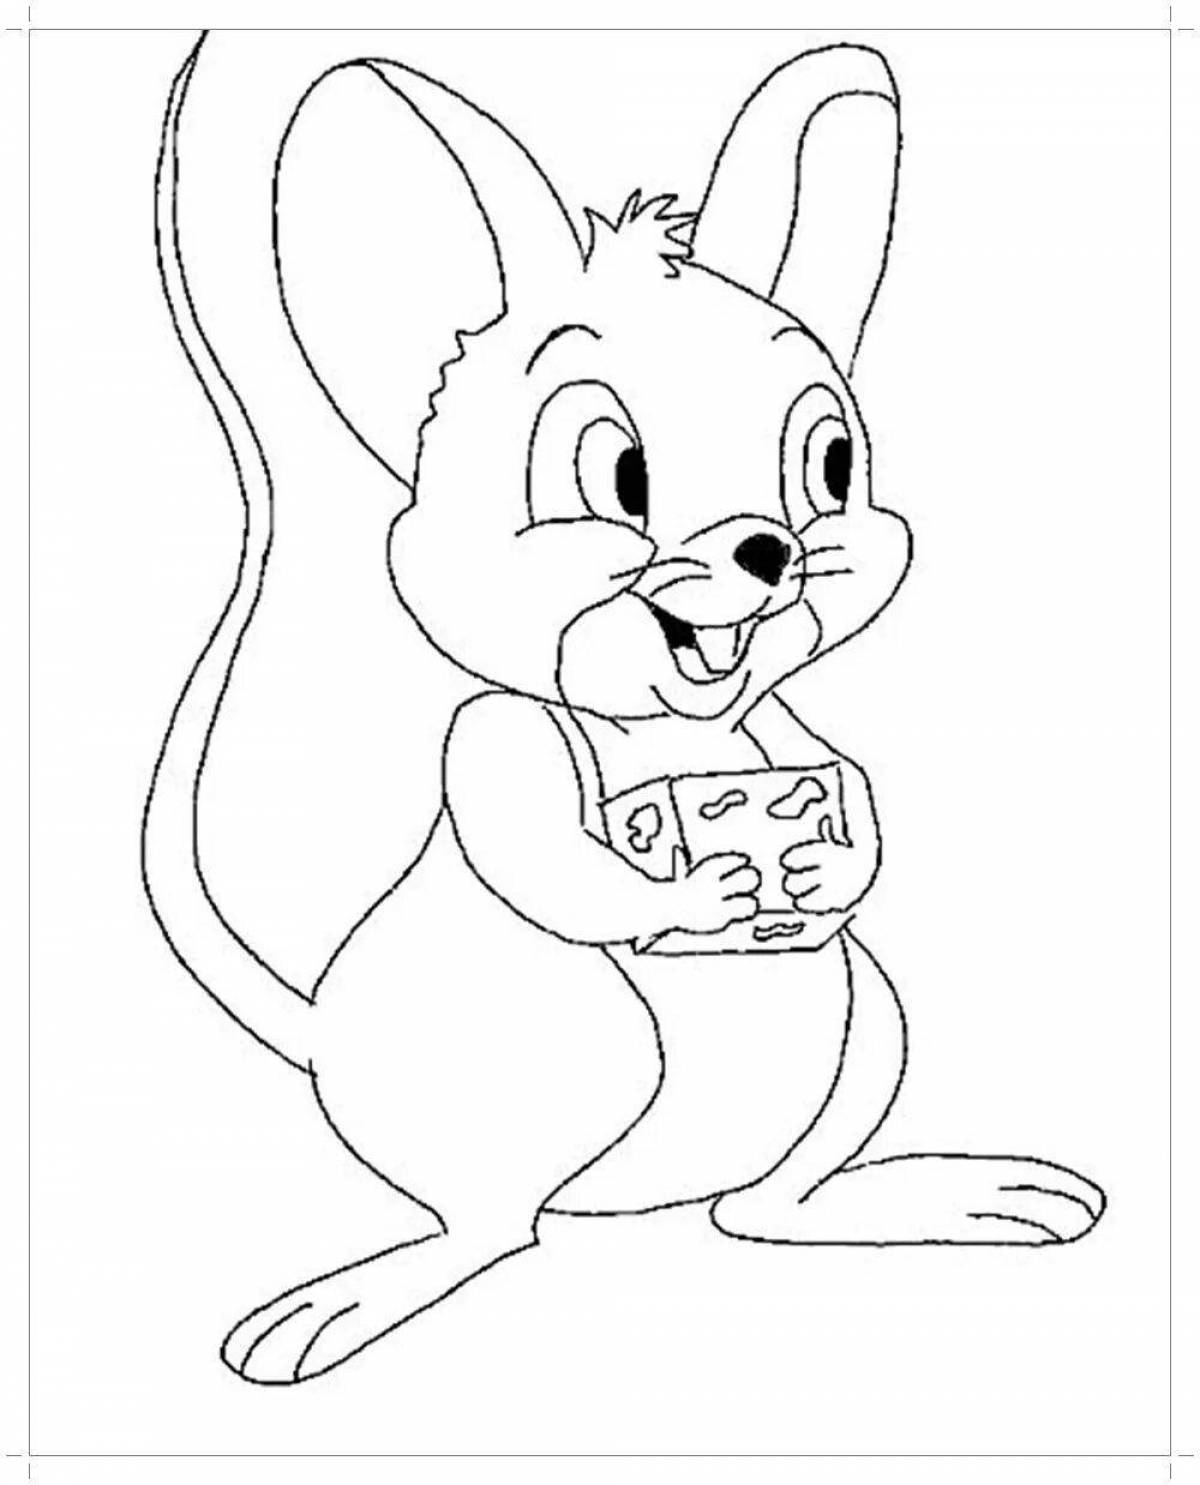 Great mouse coloring book for kids